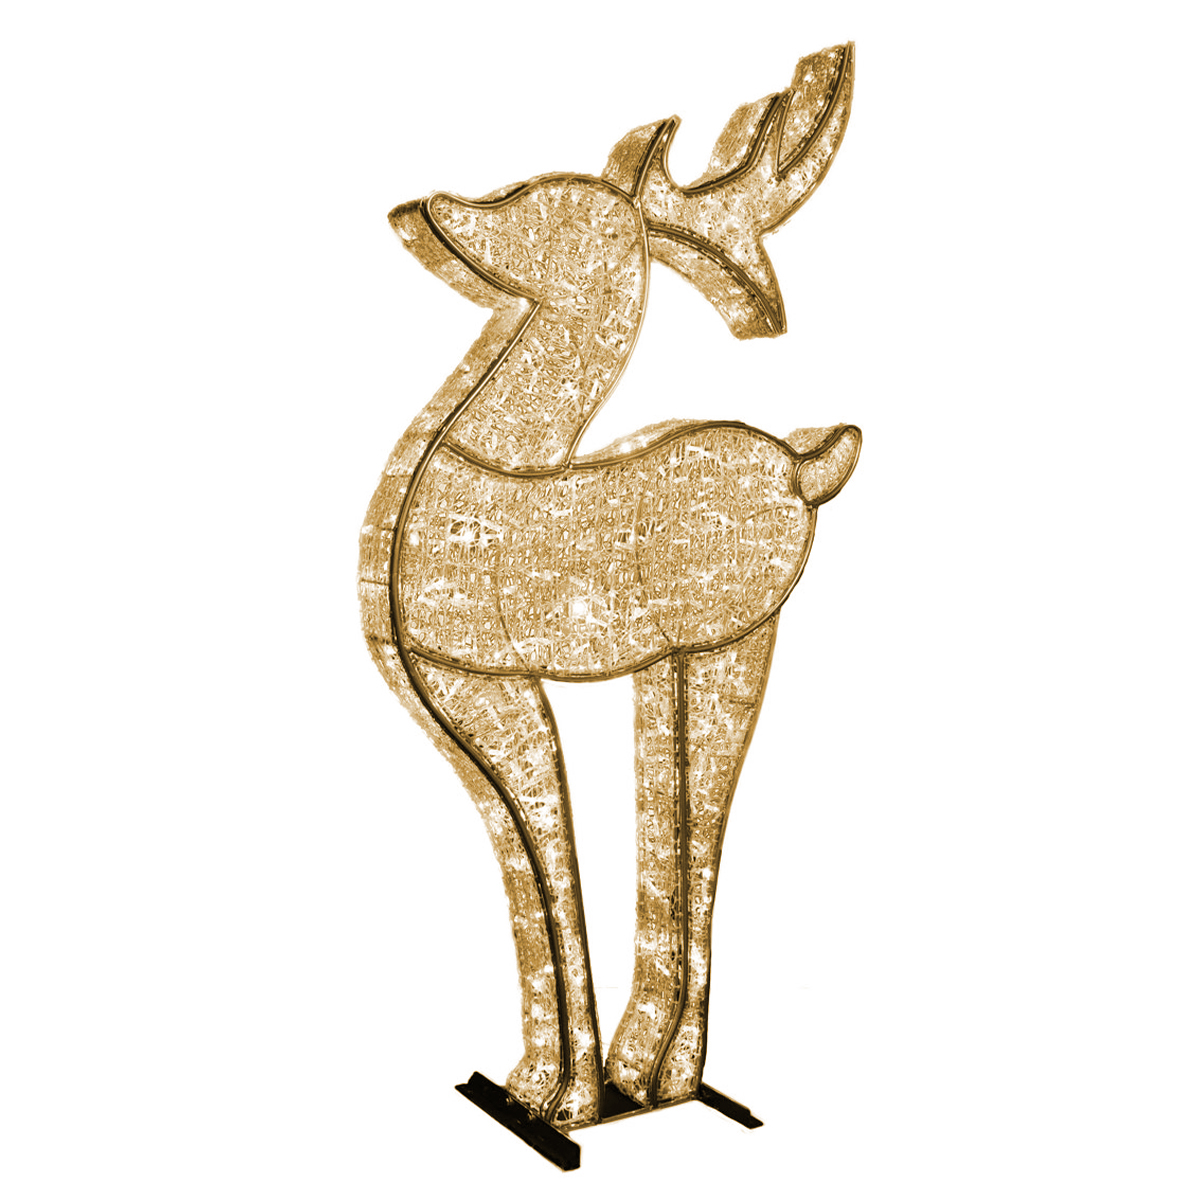 3D Deer - Christmas Display - Cool White LED-lit - Large - Gold - 9ft tall